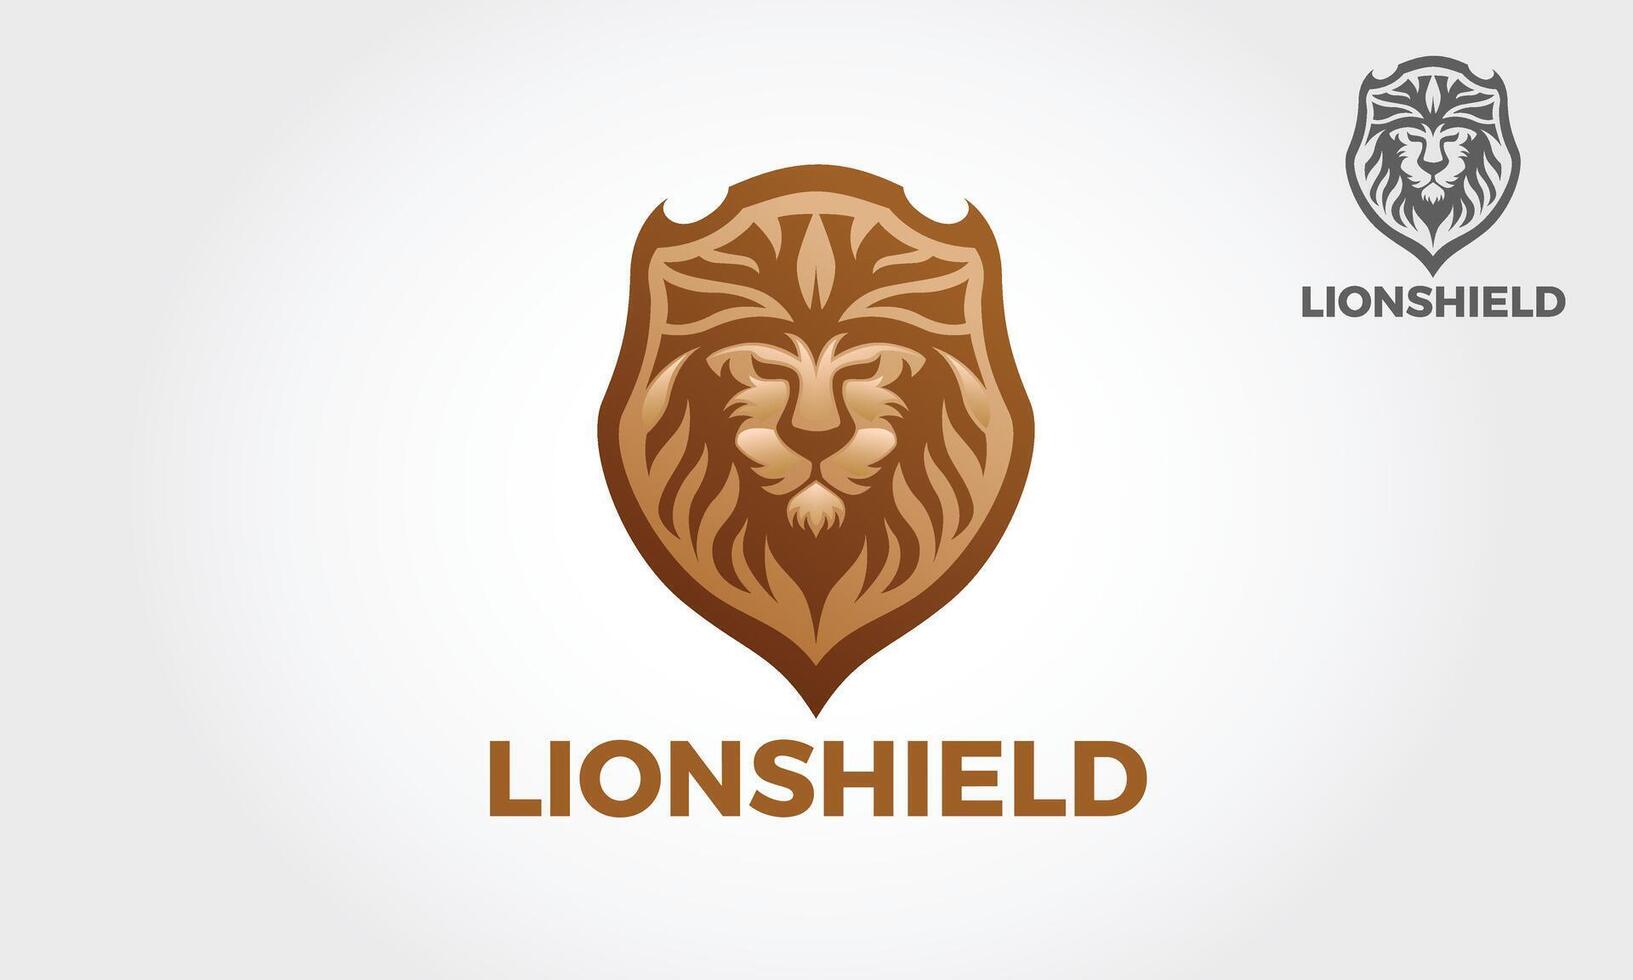 Lion Shield Vector Logo Template. This logo great for consulting firm, studios, school, sports, creative agencies, production houses, band, musician, web, or any business that needs a strong character